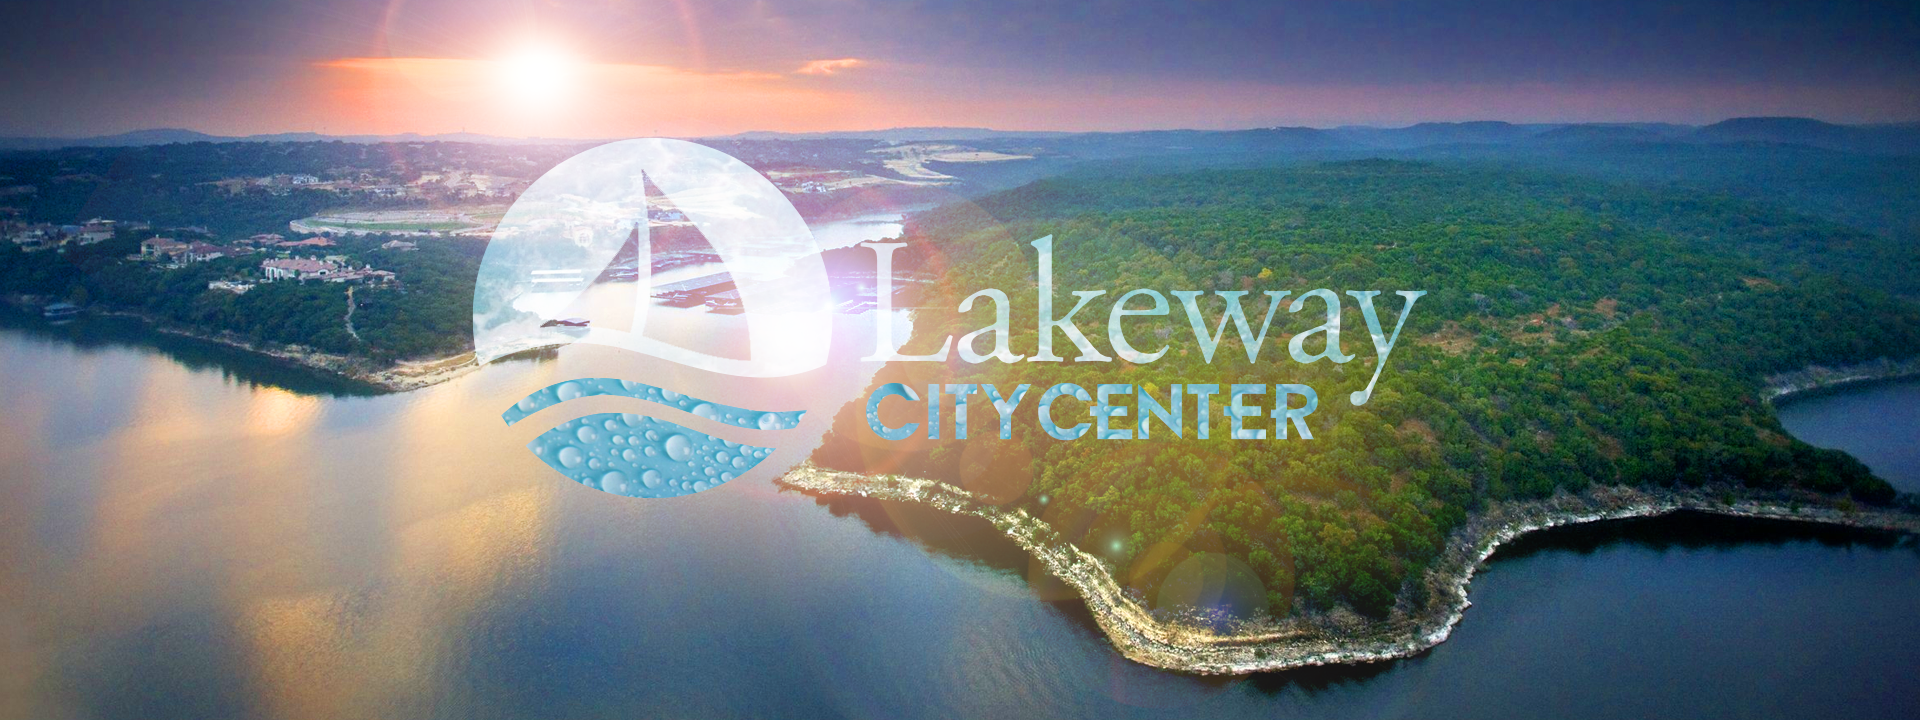 Lakeway City Center Where Families Love to Live